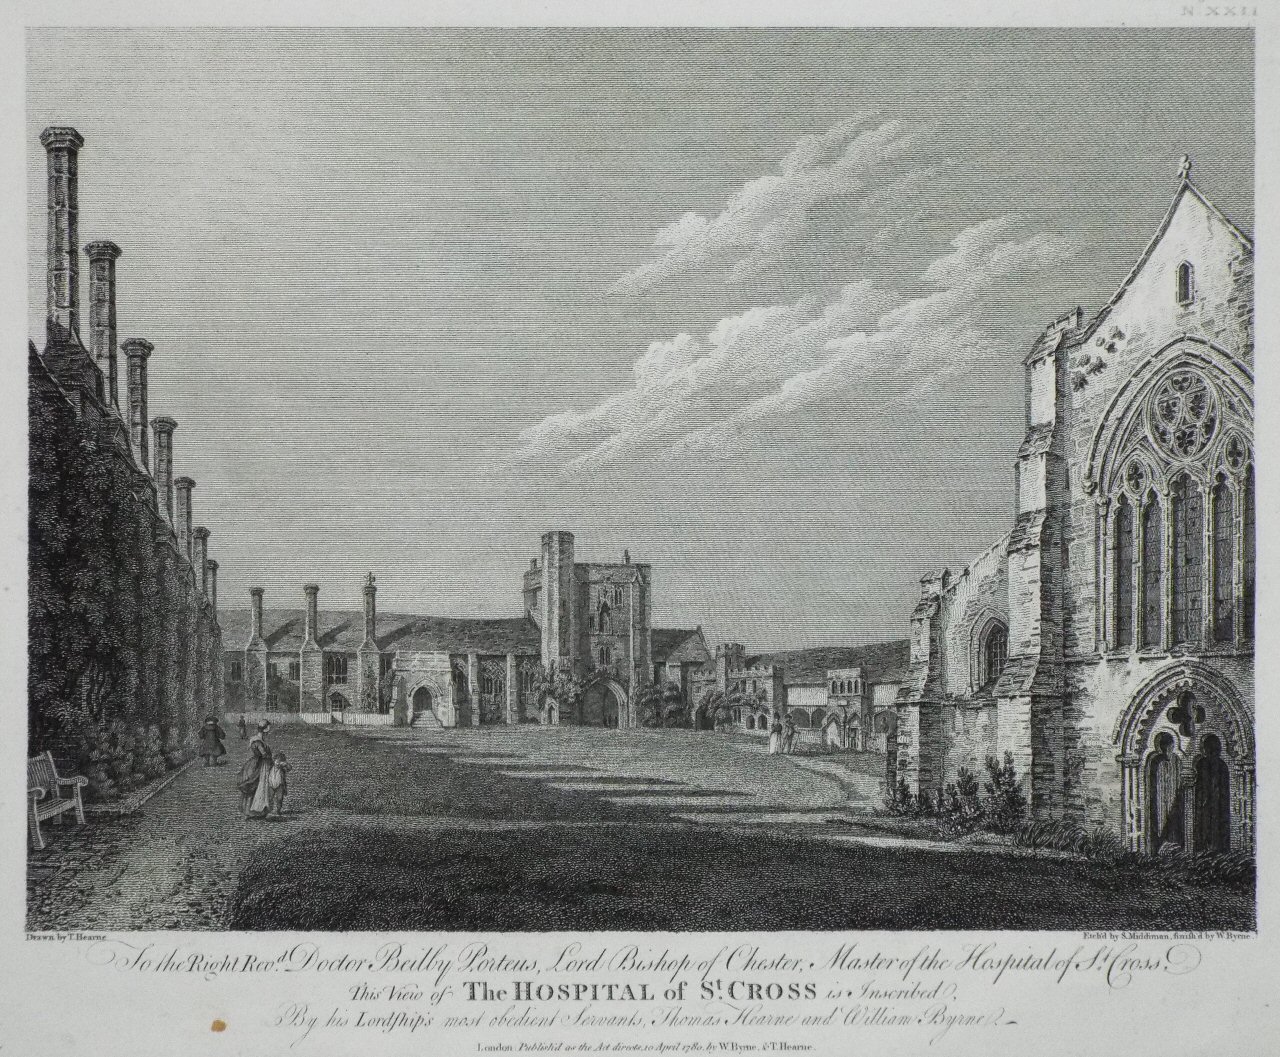 Print - To the Right Revd. Doctor Beilby Porteus, Lord Bishop of Chester, Master of the Hospital of St. Cross, This View of the Hospital of St. Cross is inscribed , By his Lordship's most obedient Sevants, Thomas Hearne and William Byrne. - Middiman